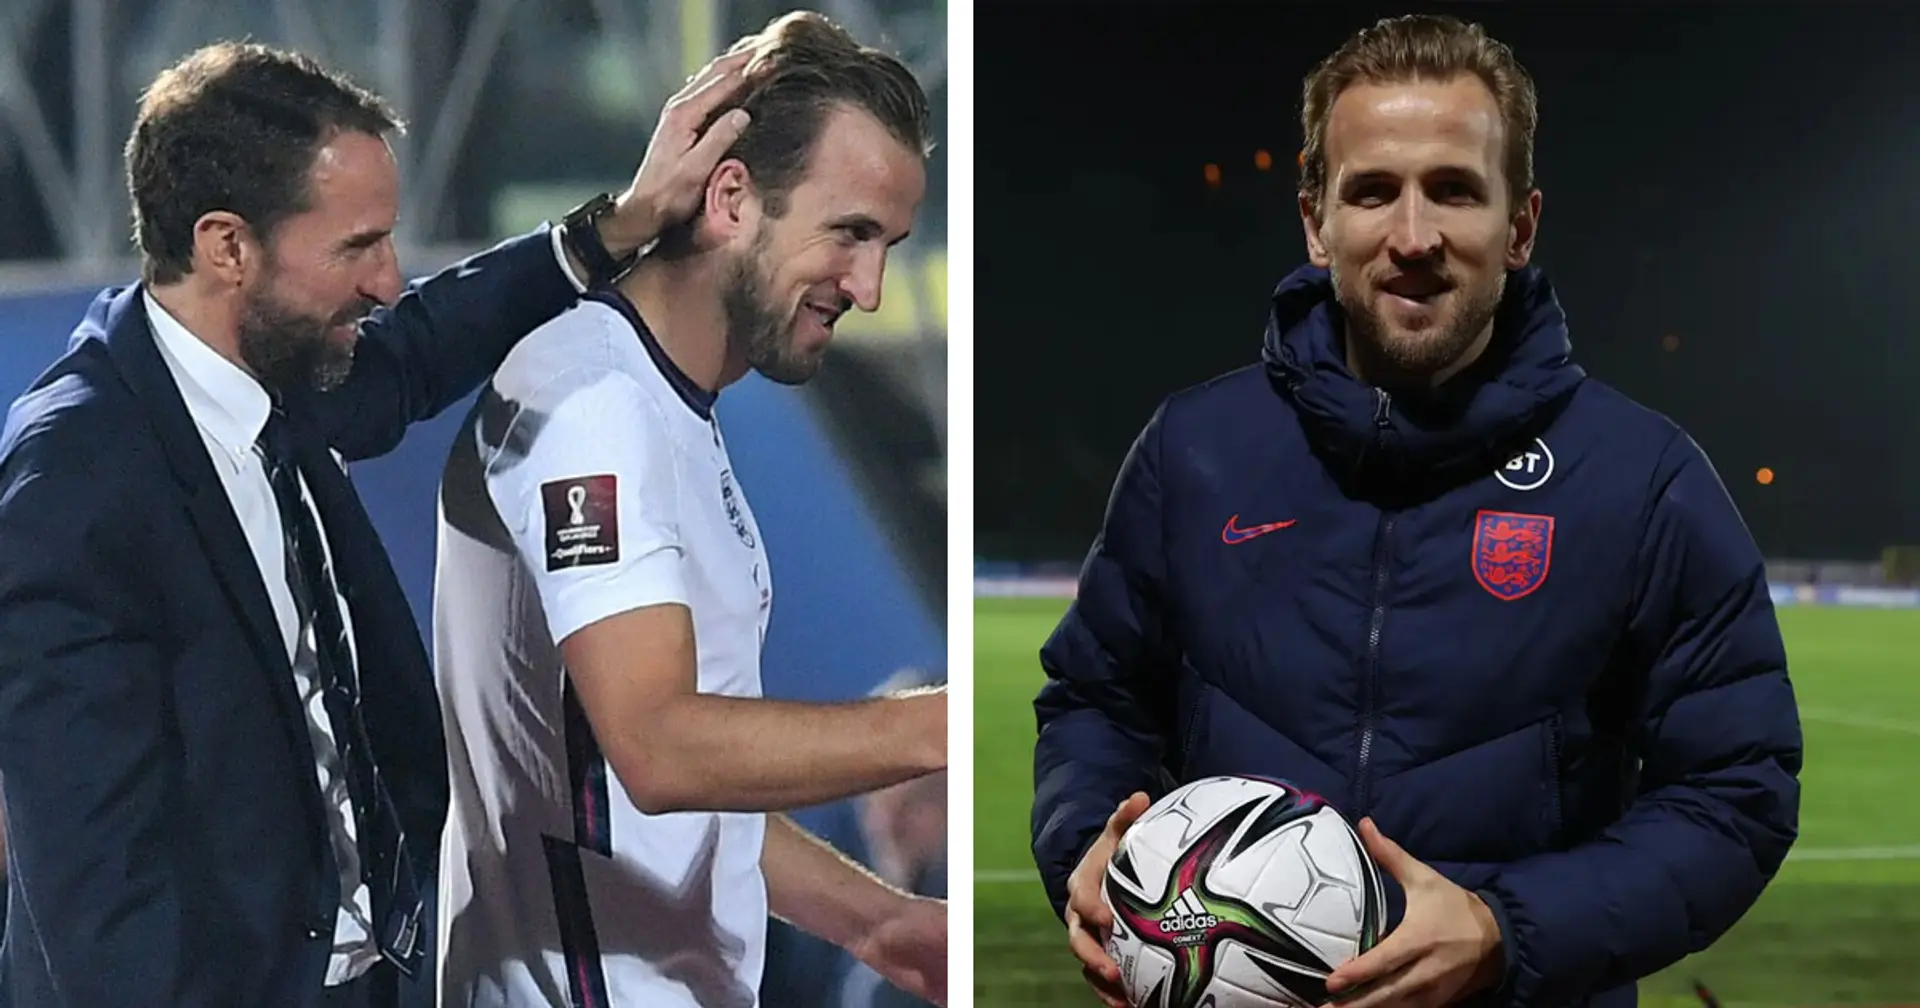 Harry Kane breaks England goal record after scoring 4 times against San Marino